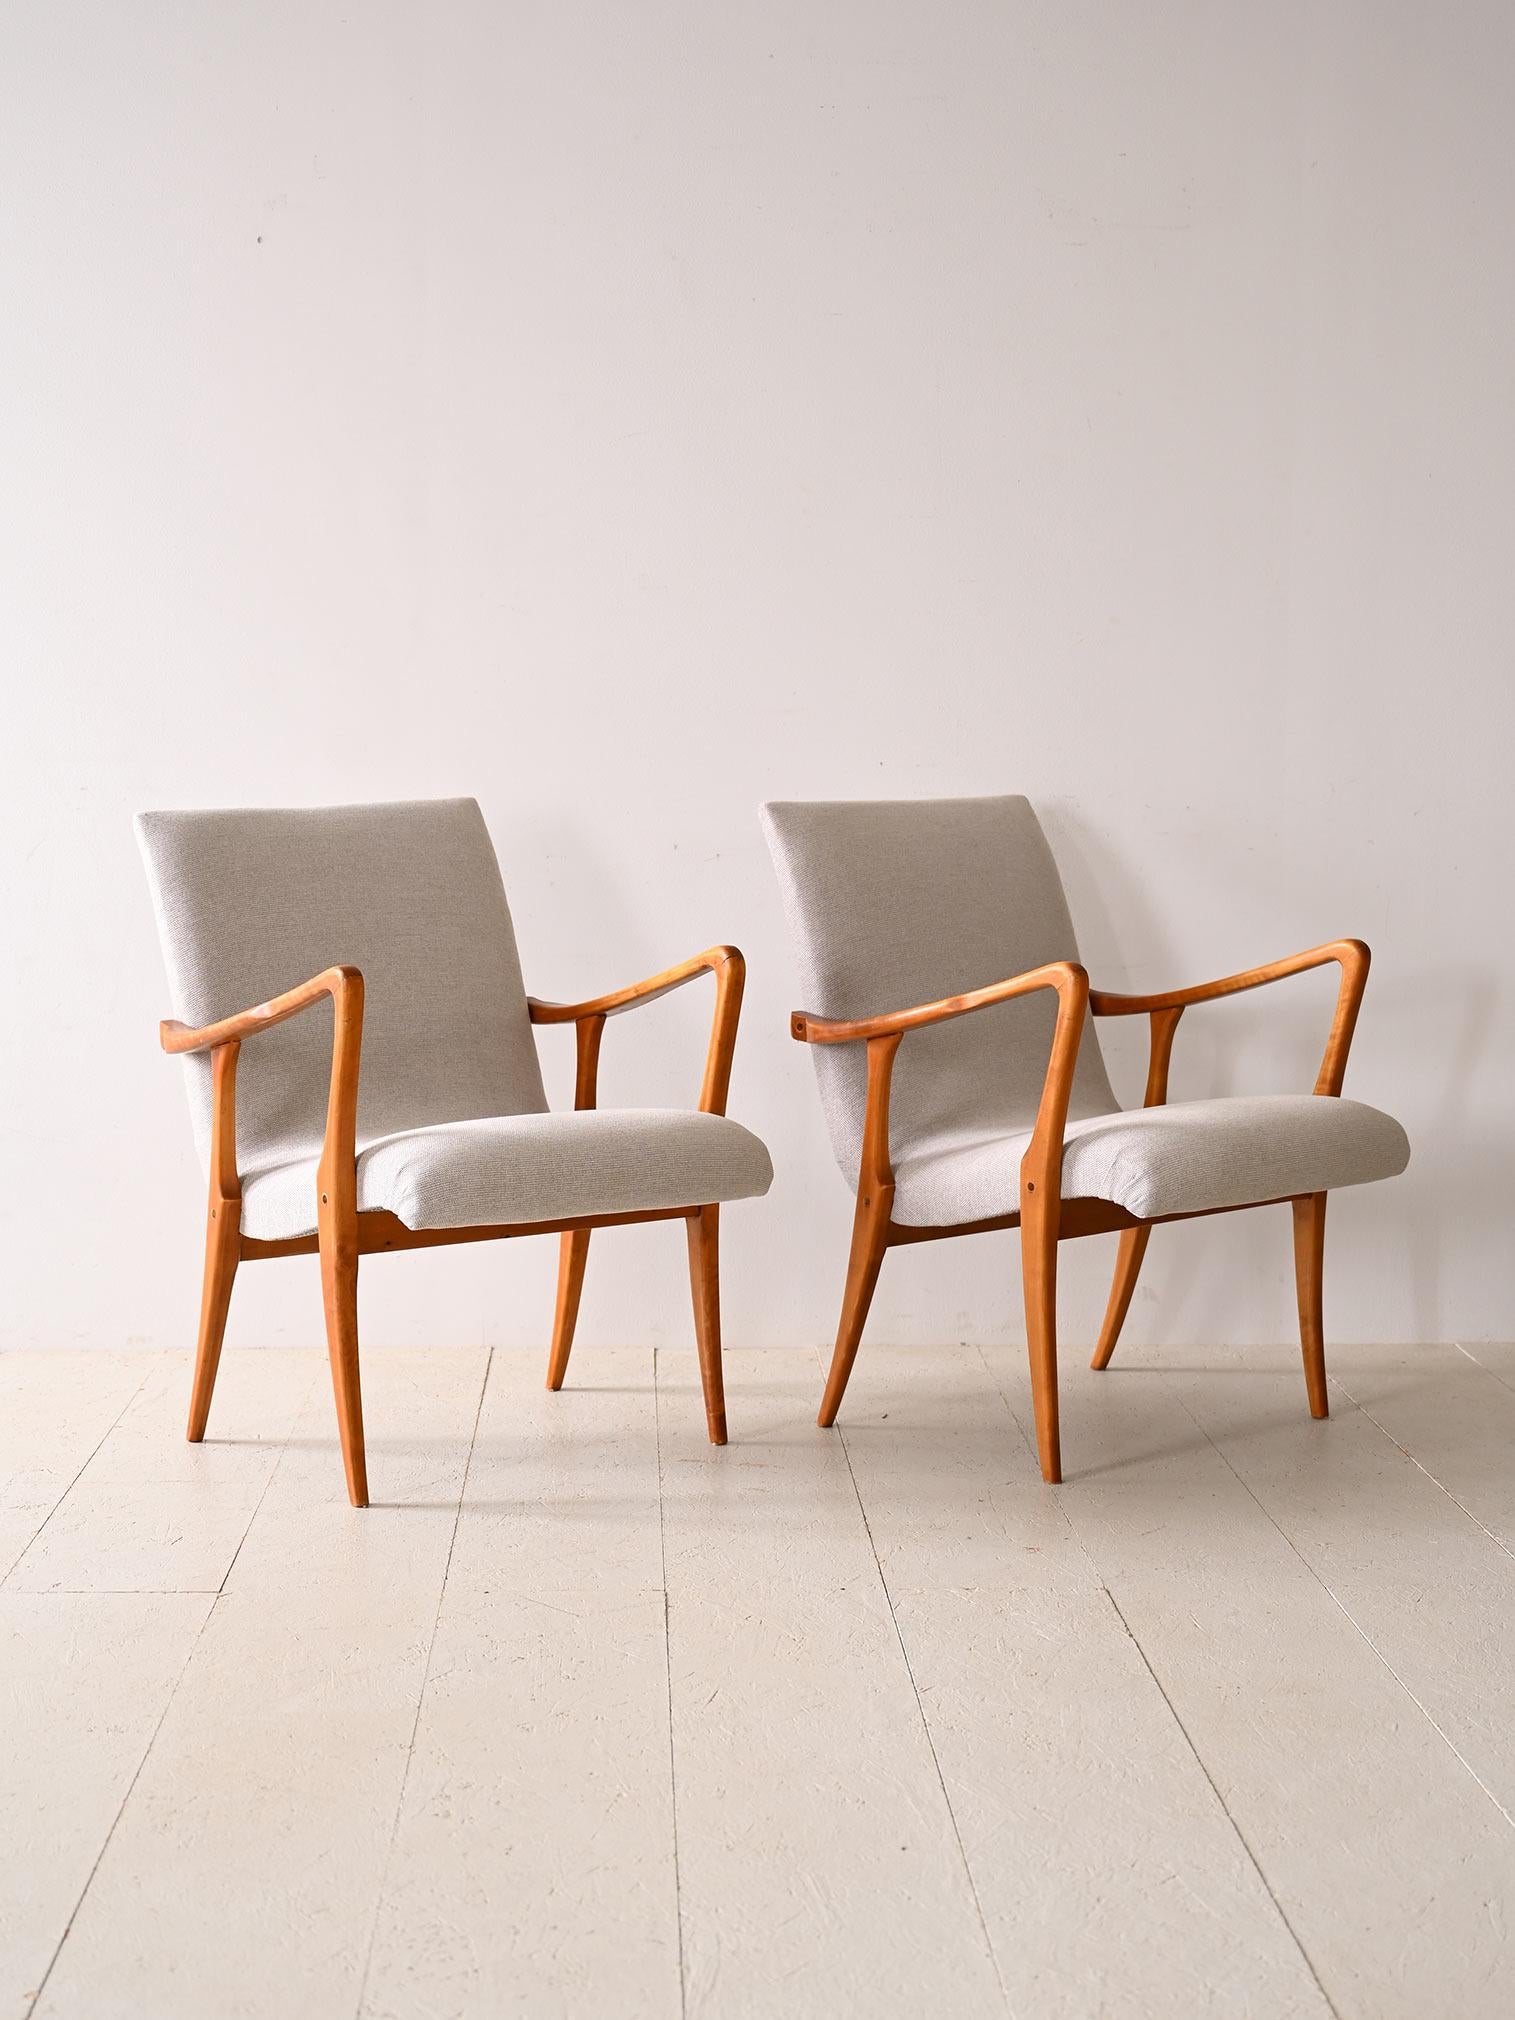 Vintage Scandinavian armchairs made of wood and light-colored fabric. Characterized by a wooden frame that features flowing, harmonious curves that perfectly complement the upholstered seat covered in light-colored fabric. This bright fabric adds